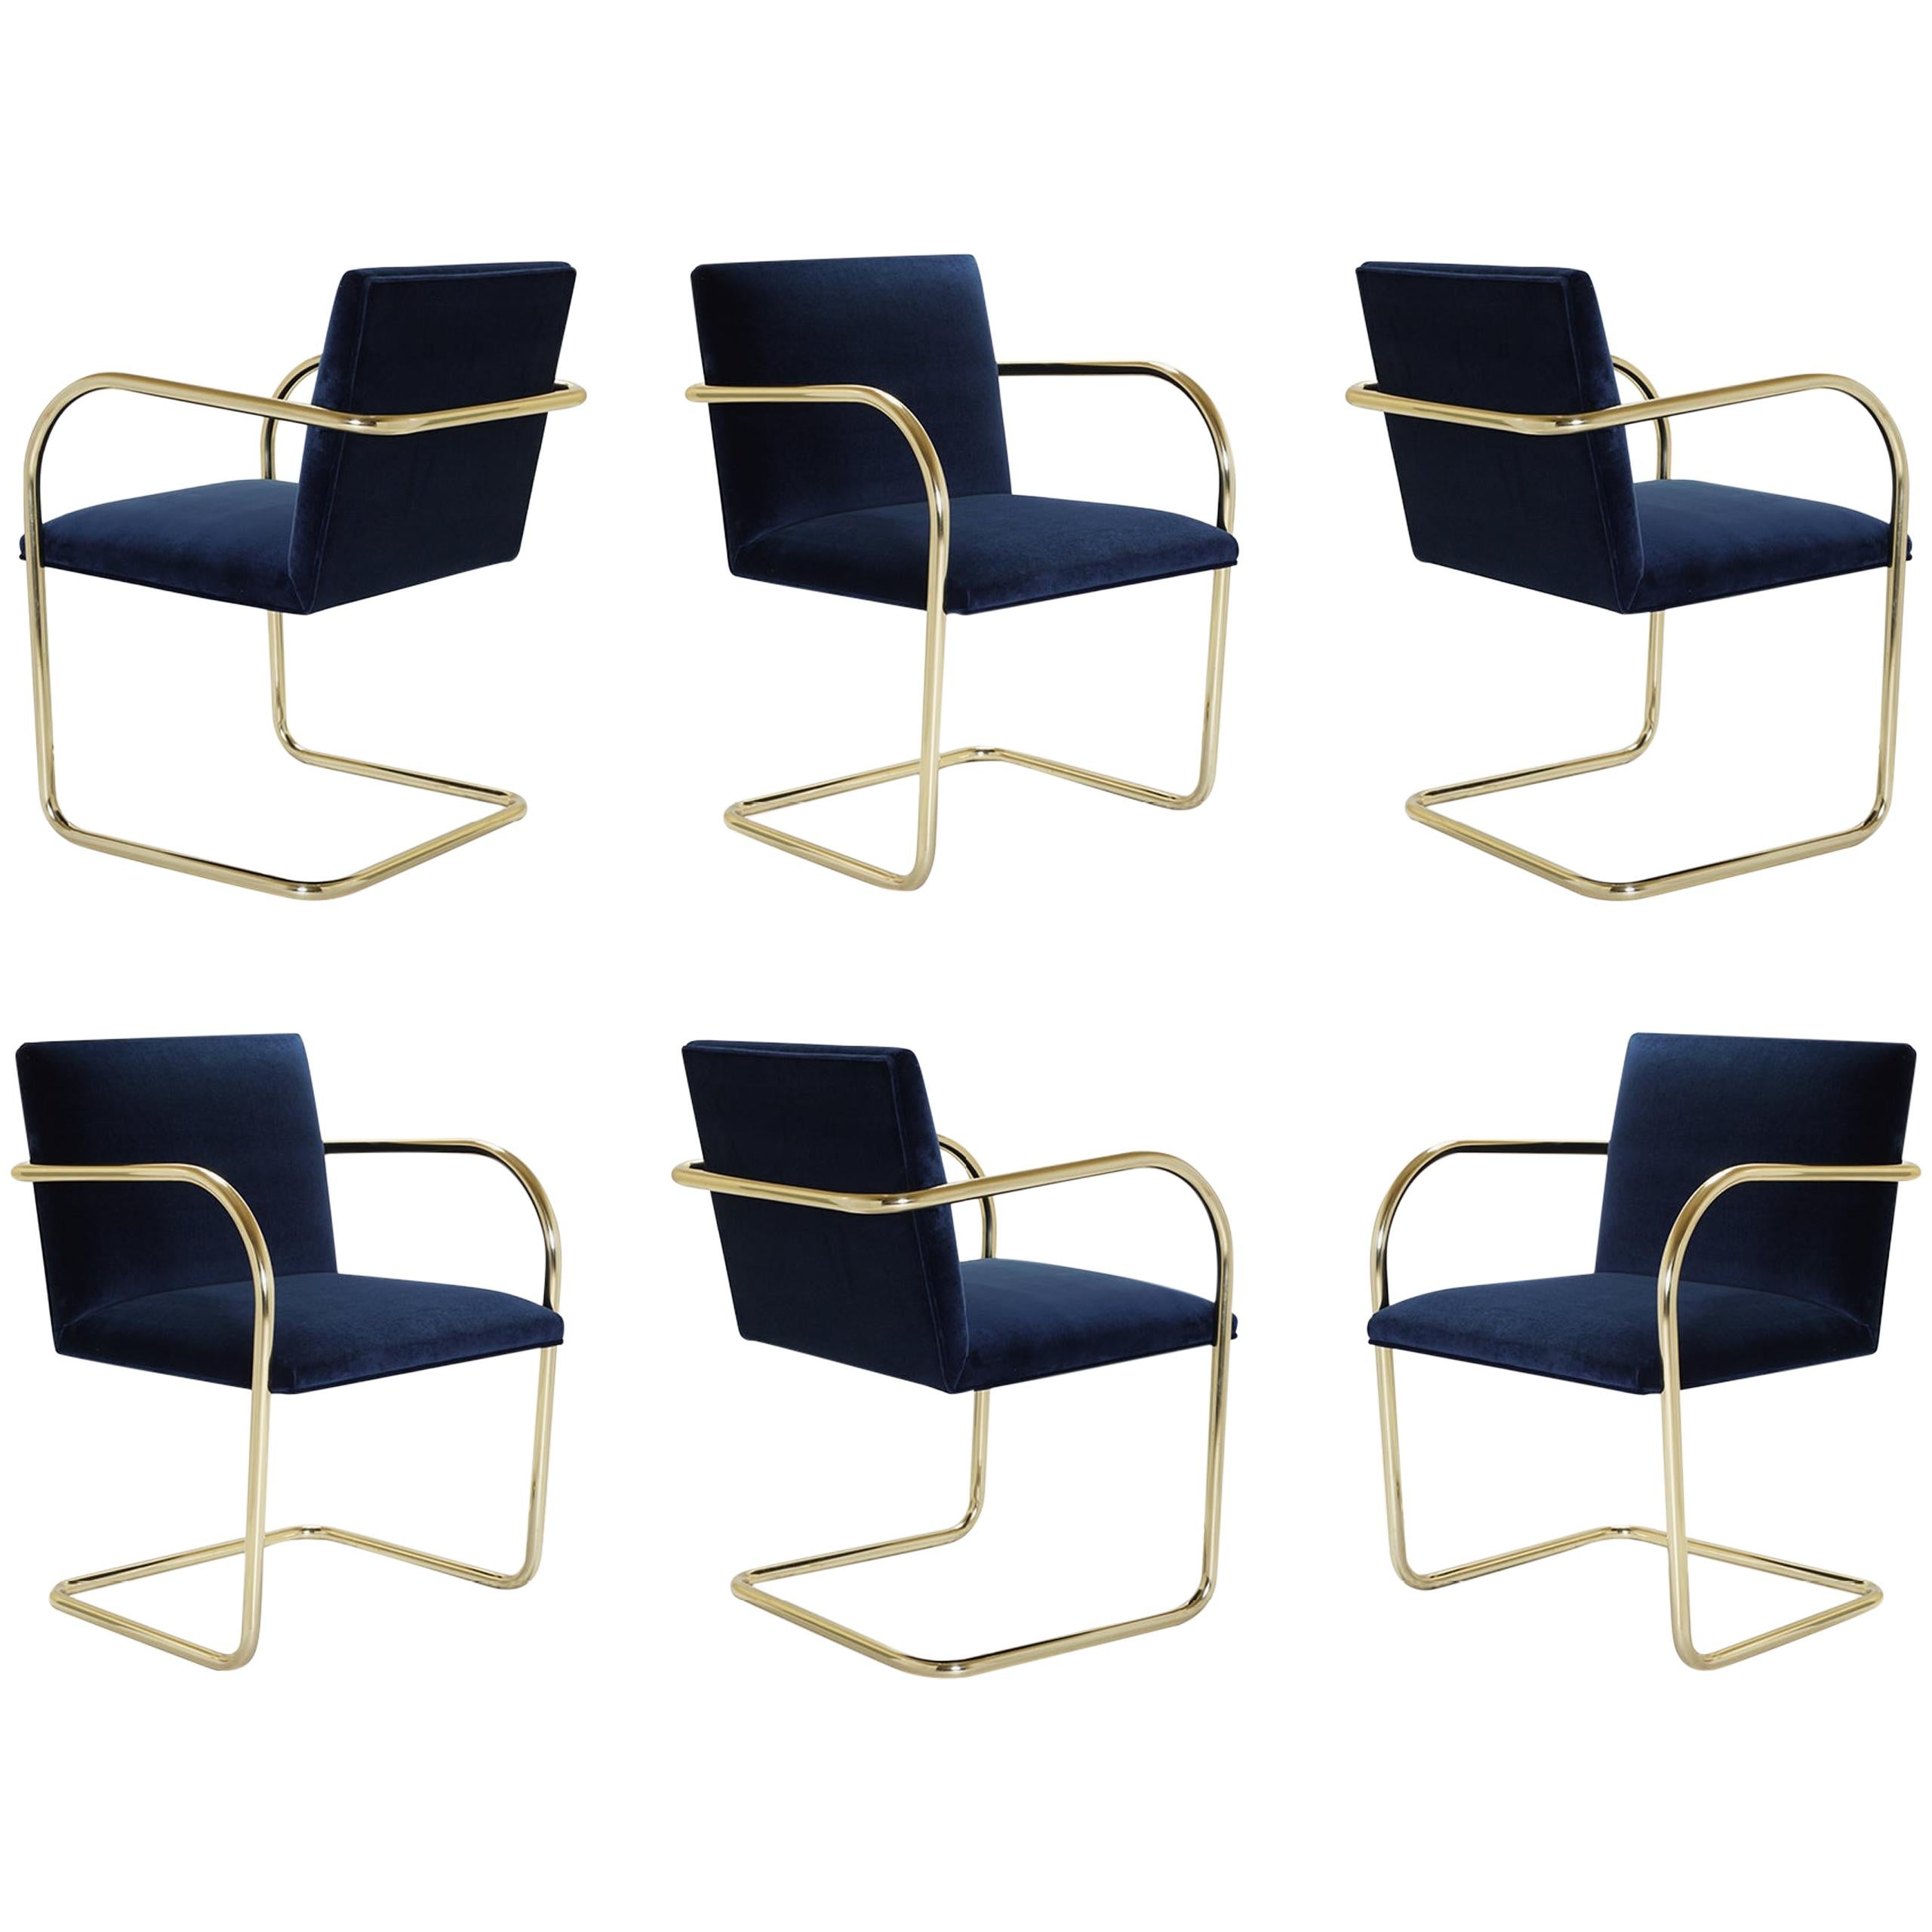 Brno Tubular Chairs in Velvet Polished Brass by Mies van der Rohe for Knoll, 6